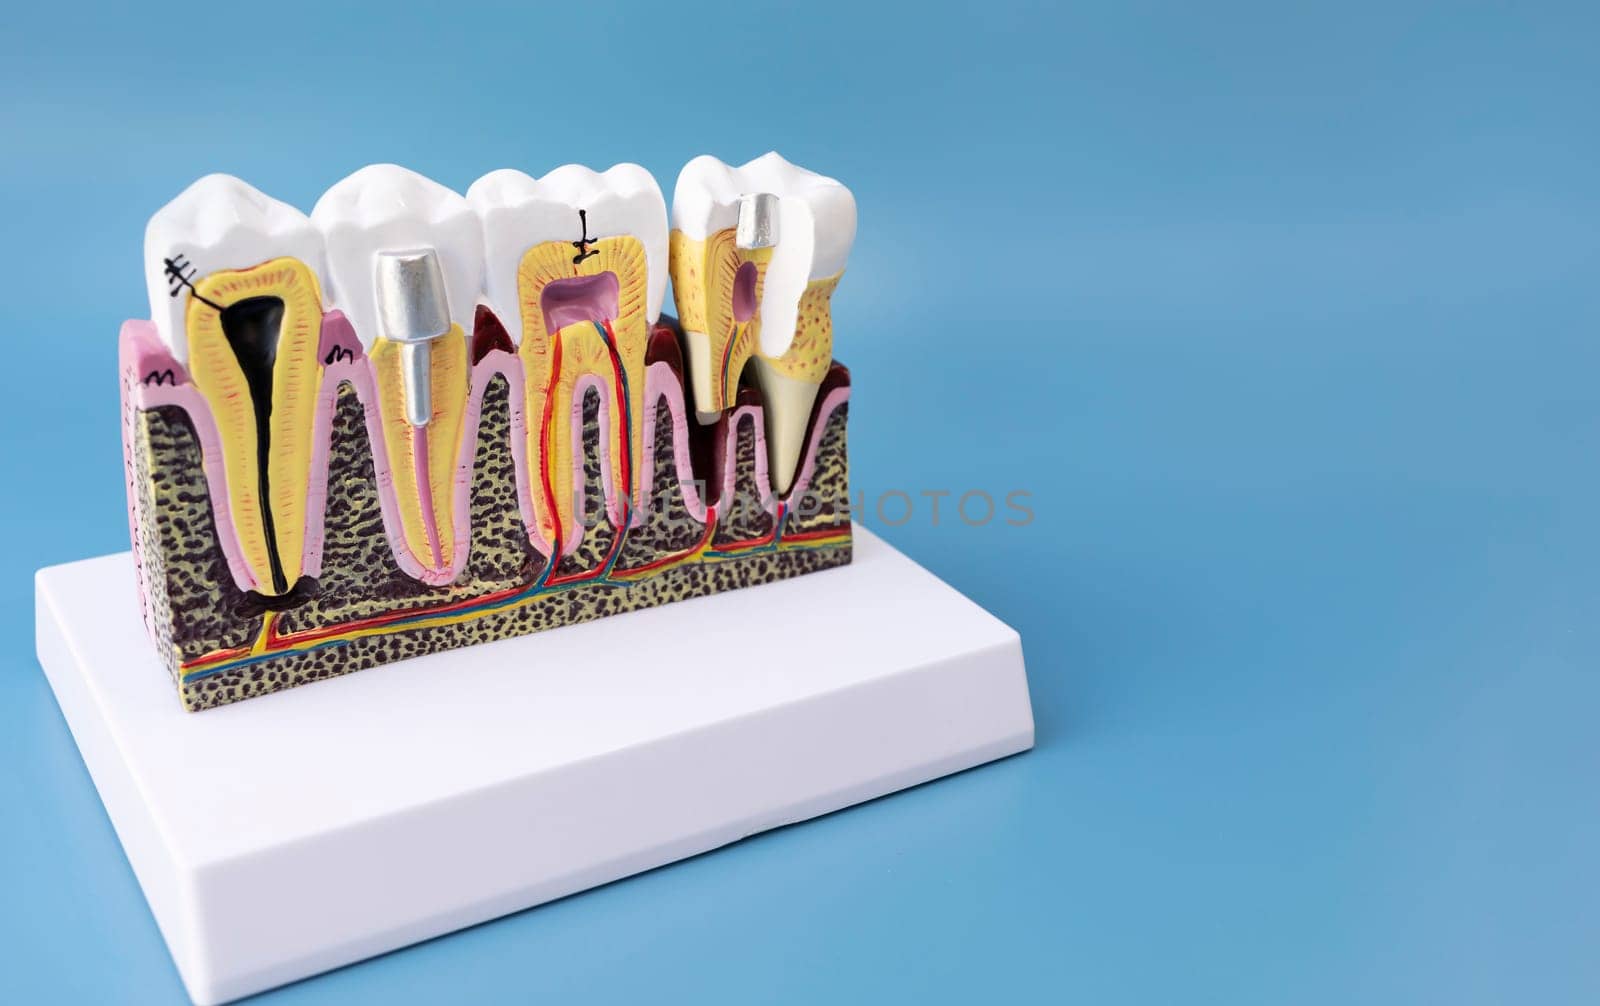 Dental Tooth Bridge Or Implant Model On Blue Background, Copy Space For Text. Dummy Mockup Human Jaw Oral Dentures. Prosthesis On Metal Peg. Horizontal Plane by netatsi